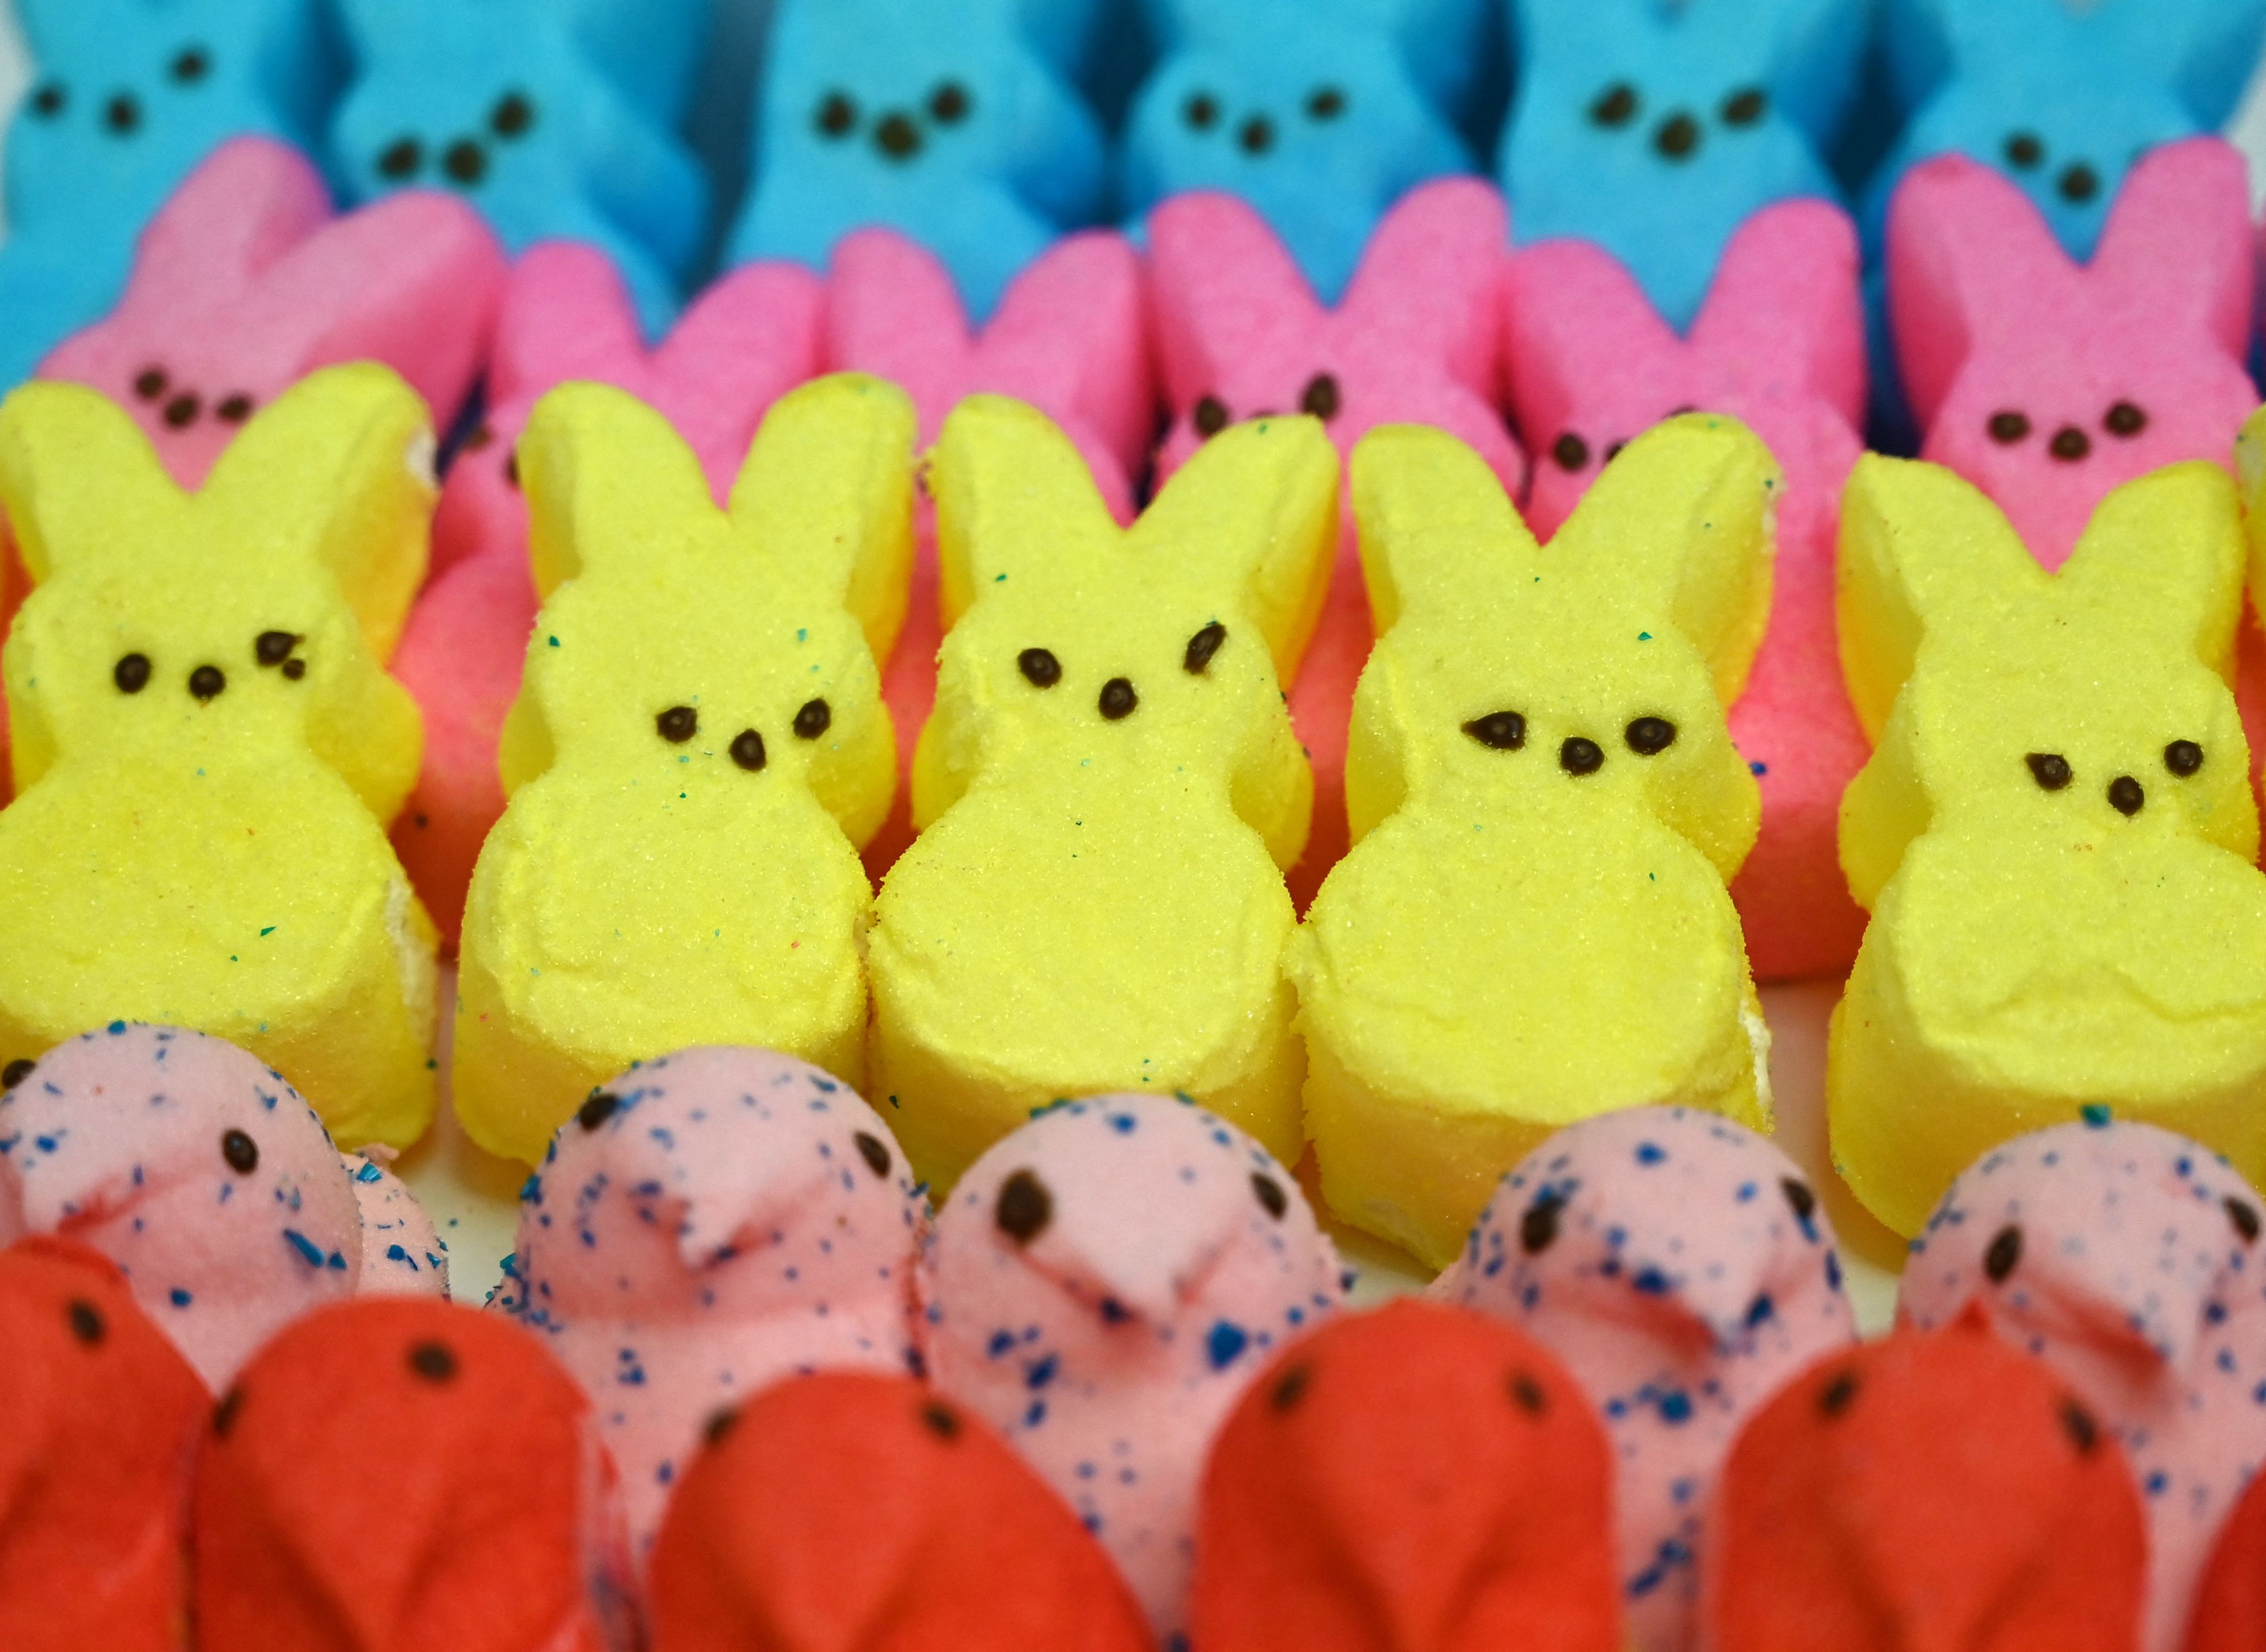 If Hollywood has its way, these Peeps marshmallow candies may be future movie stars.